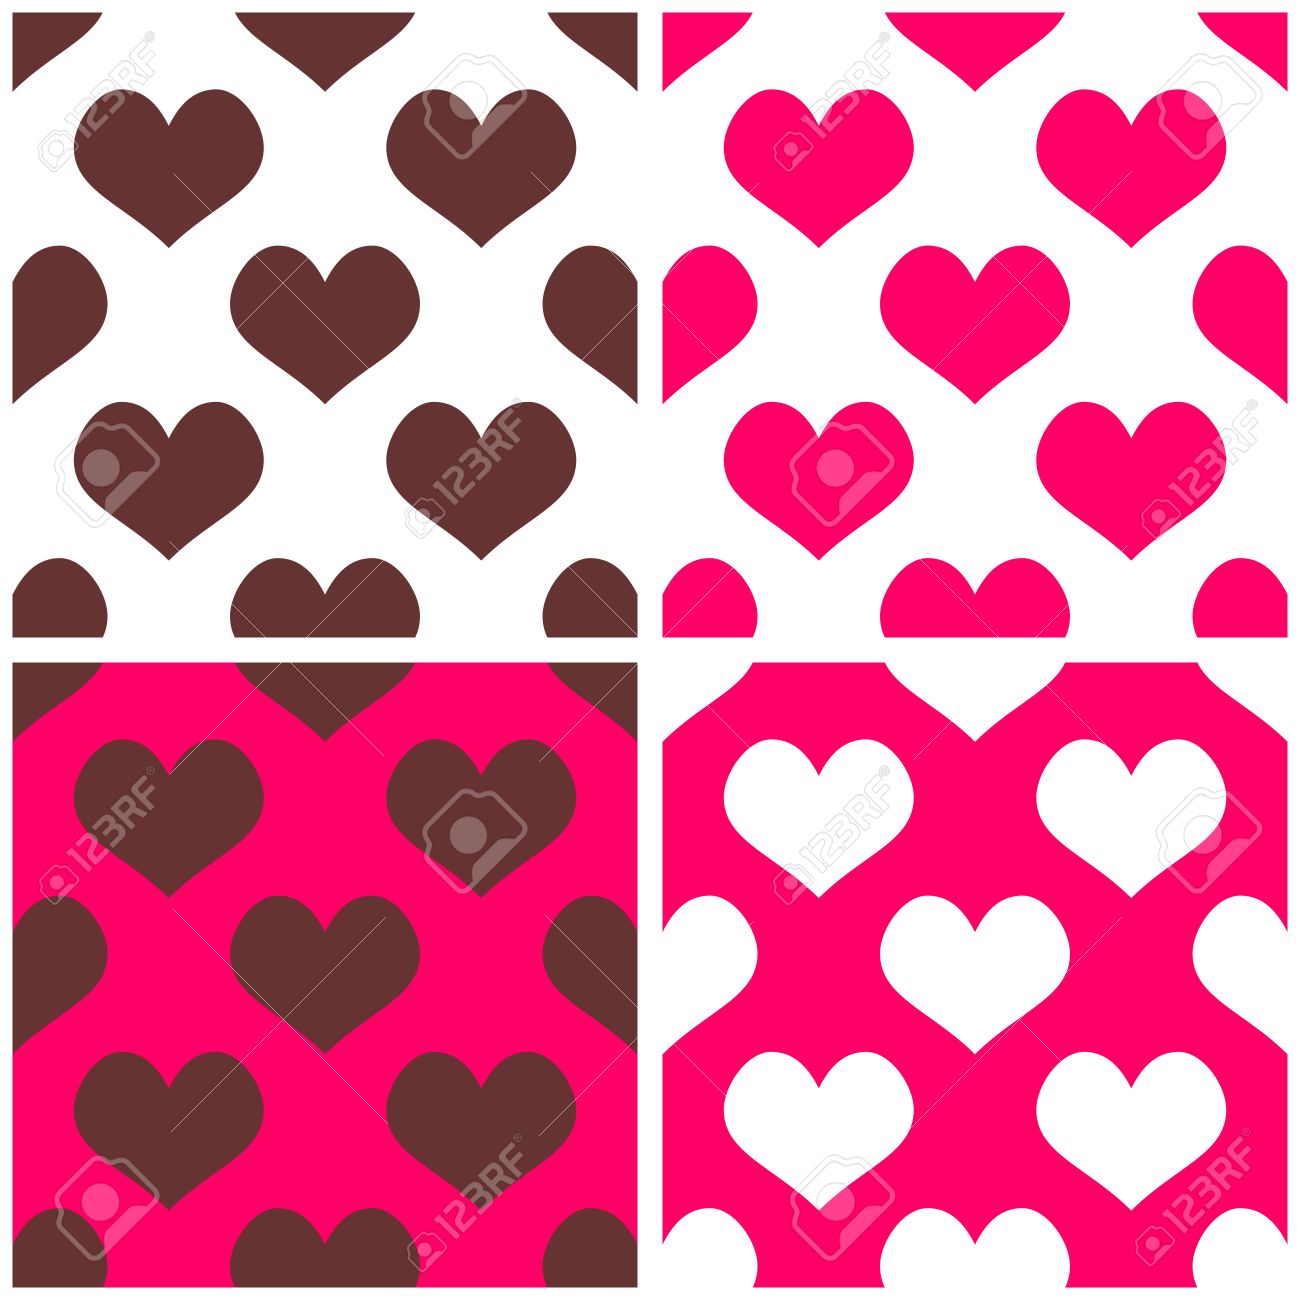 Seamless Pink Vector Background Set With Hearts Full Of Love